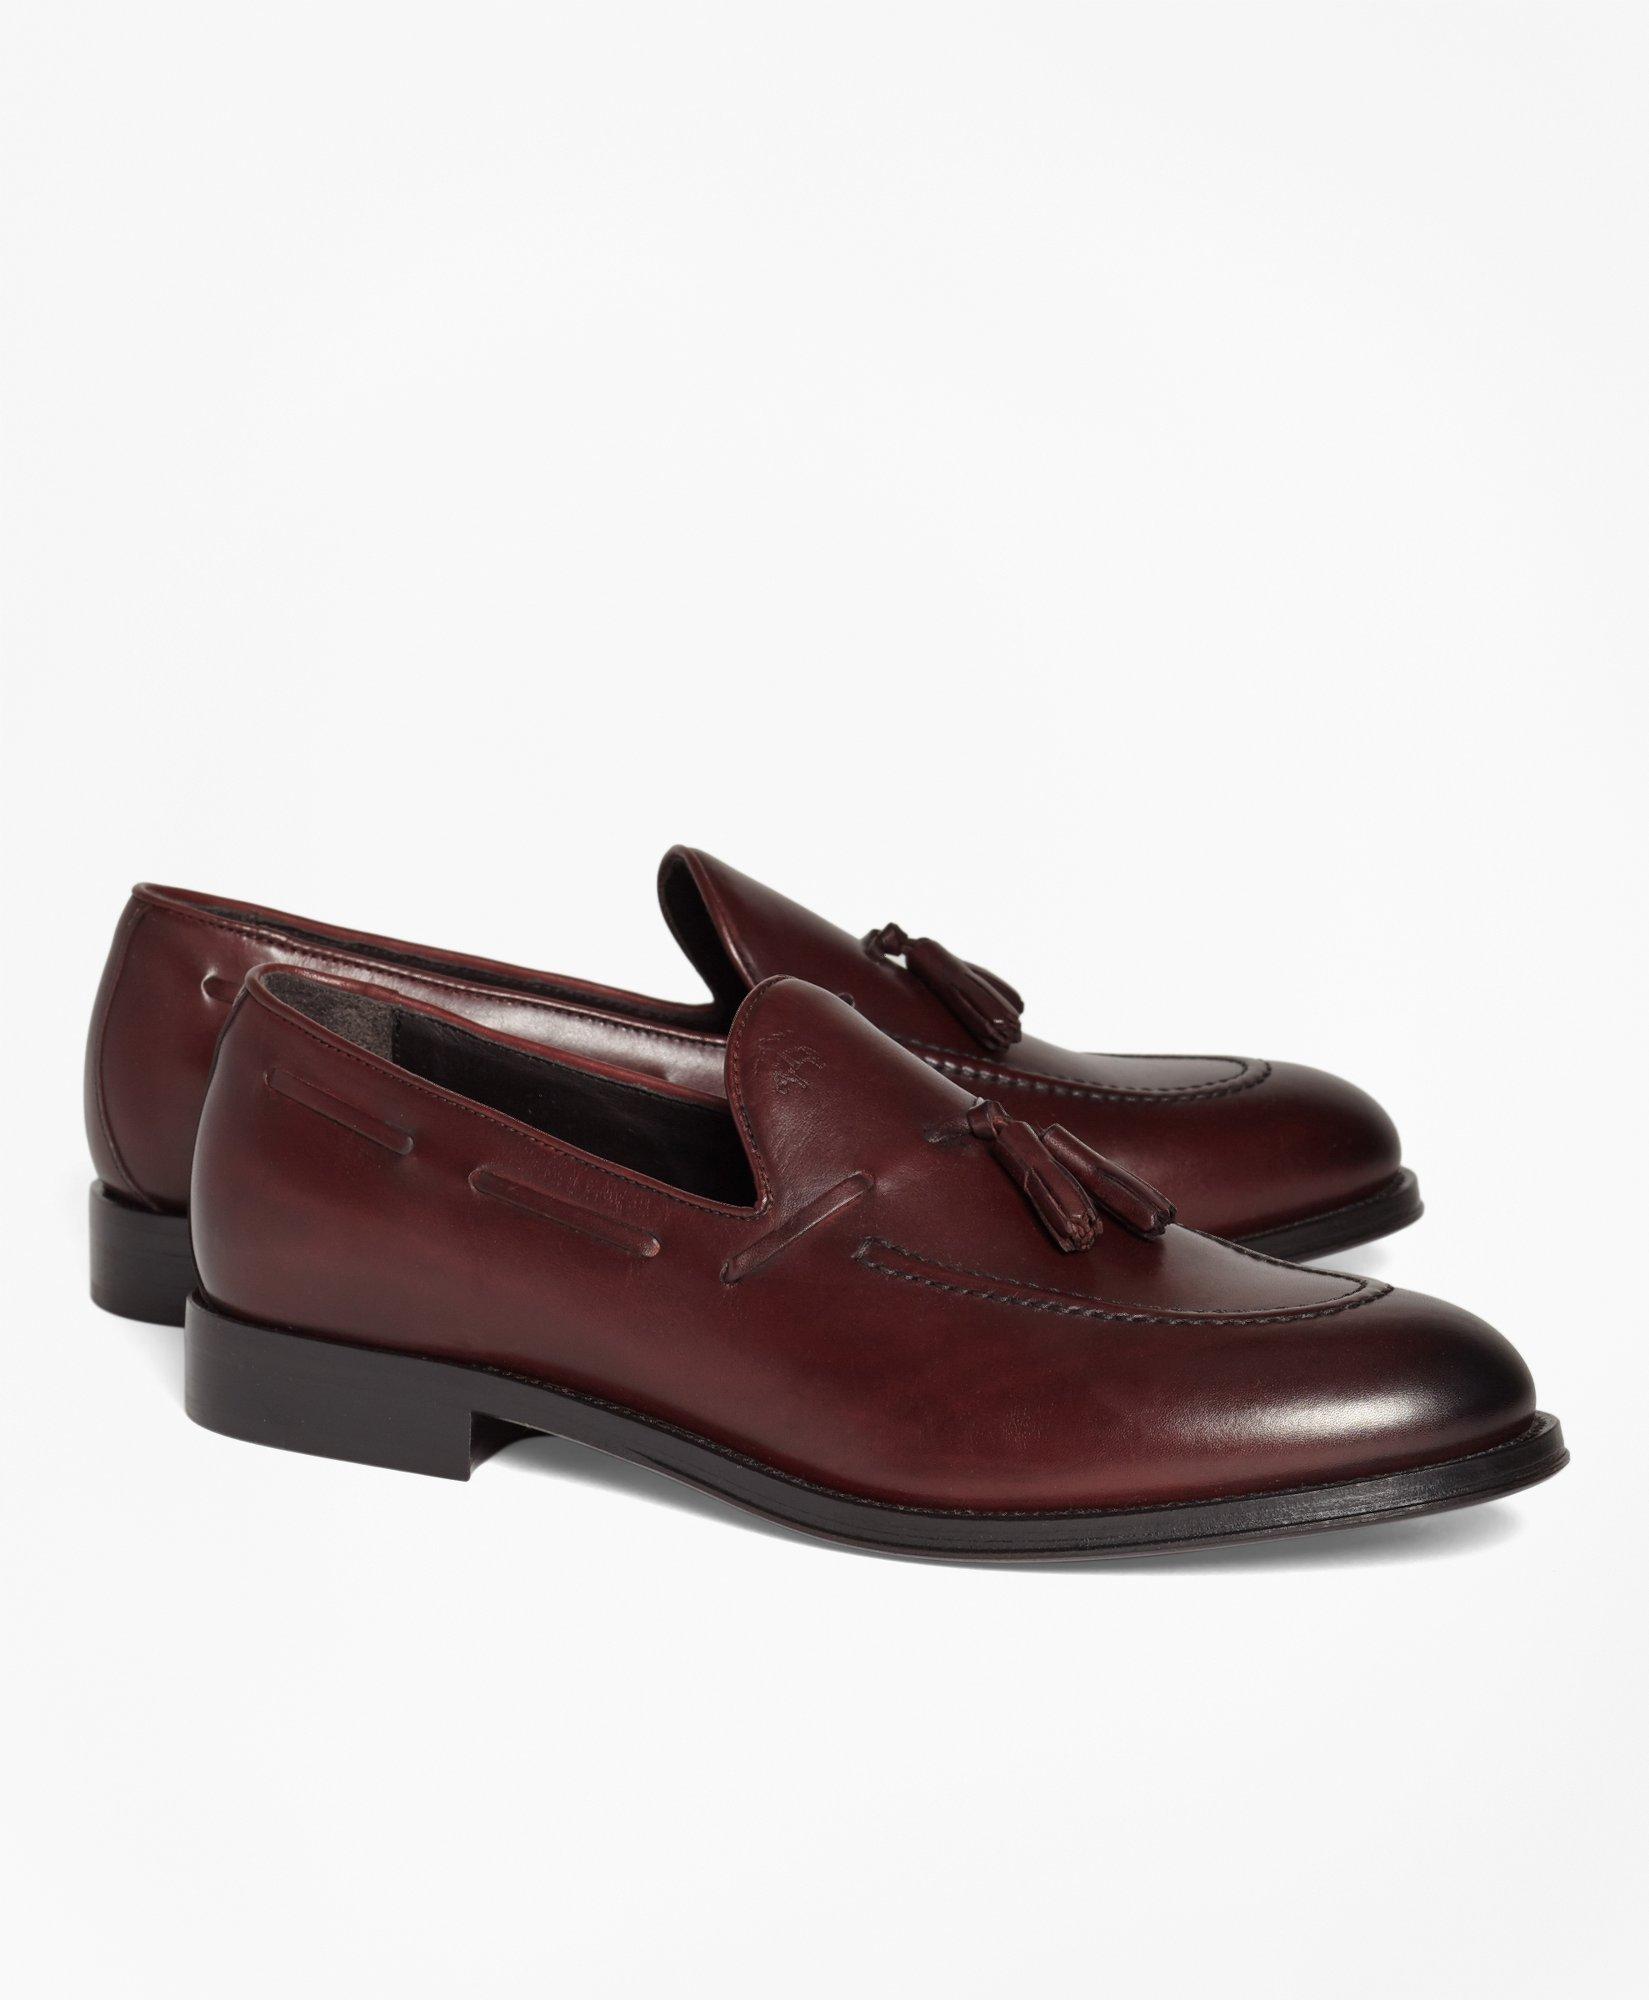 Brooks Brothers 1818 Footwear Leather Tassel Loafers | Burgundy | Size 13 D